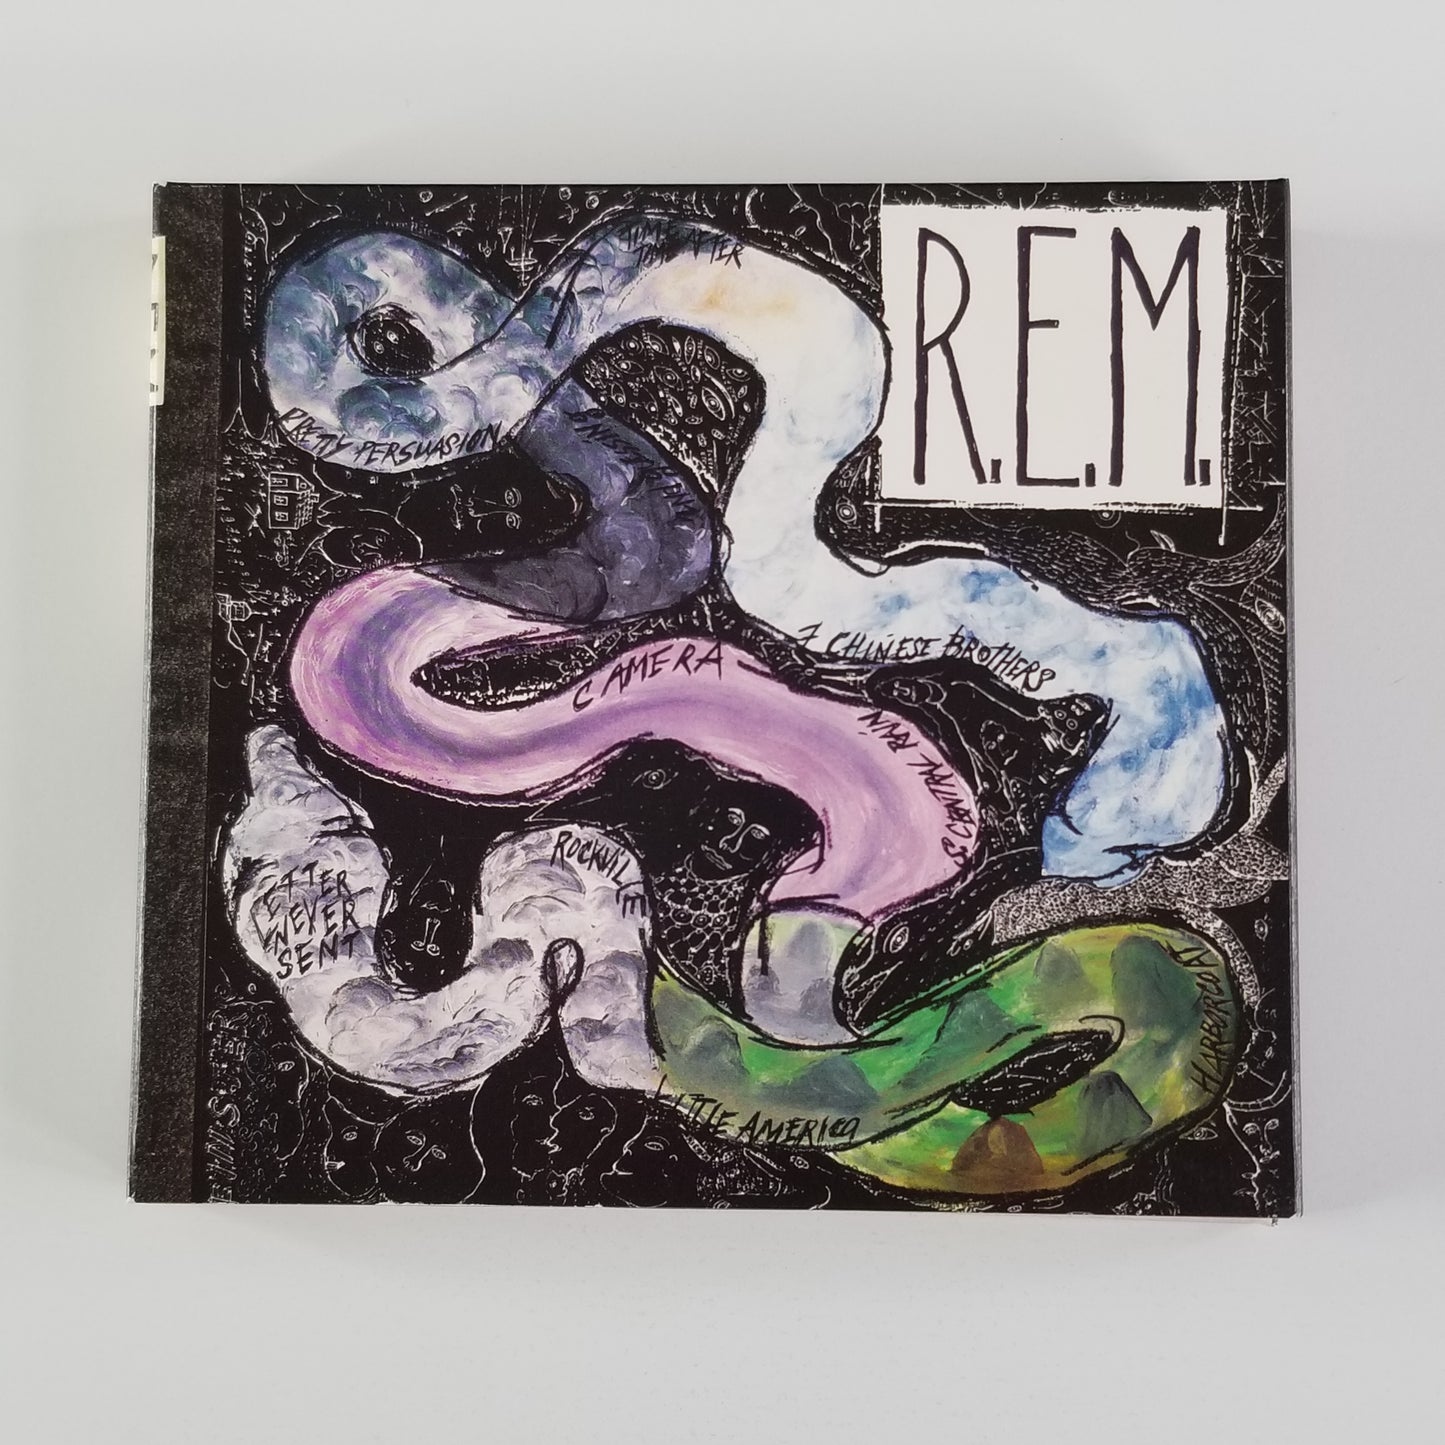 R.E.M. - Reckoning Deluxe Edition (2009, CD)